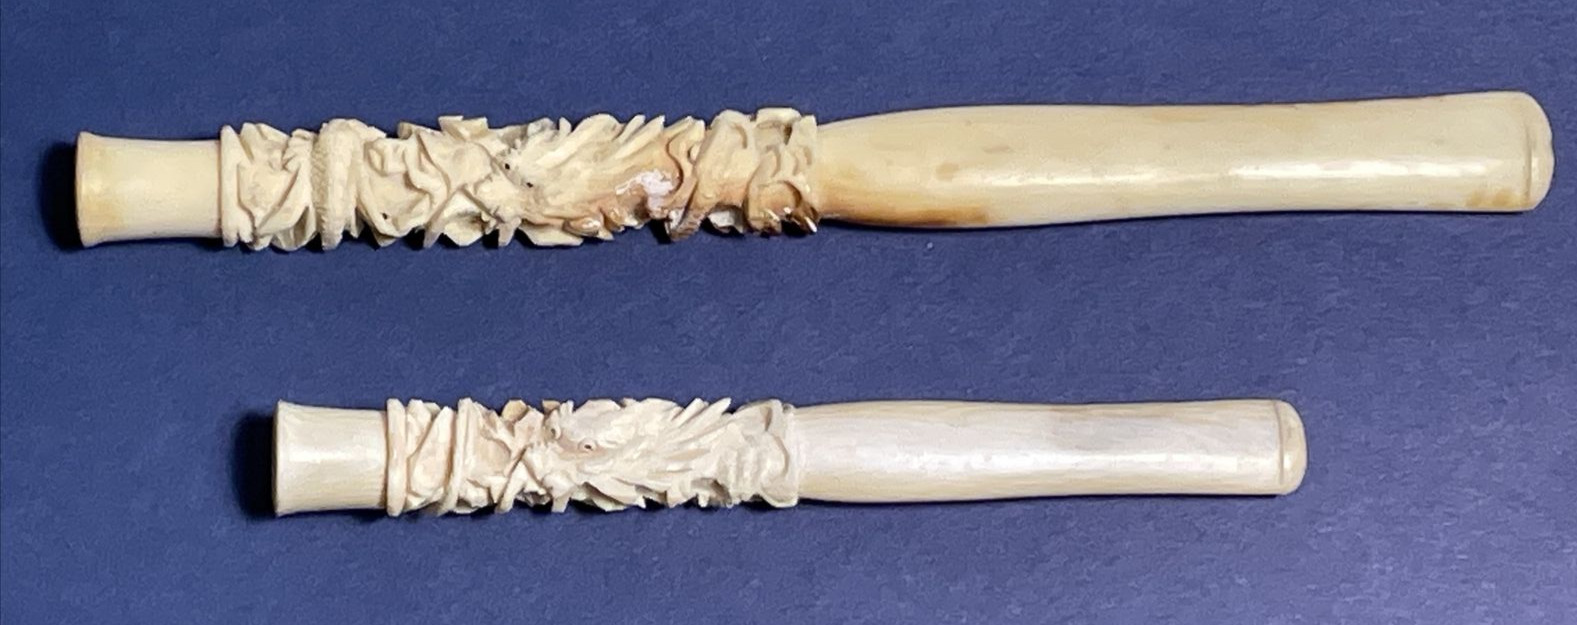 Set of 2 Two Antique Ivory Cigarette Holders Dragon Wrapped Black Eyes Smoking